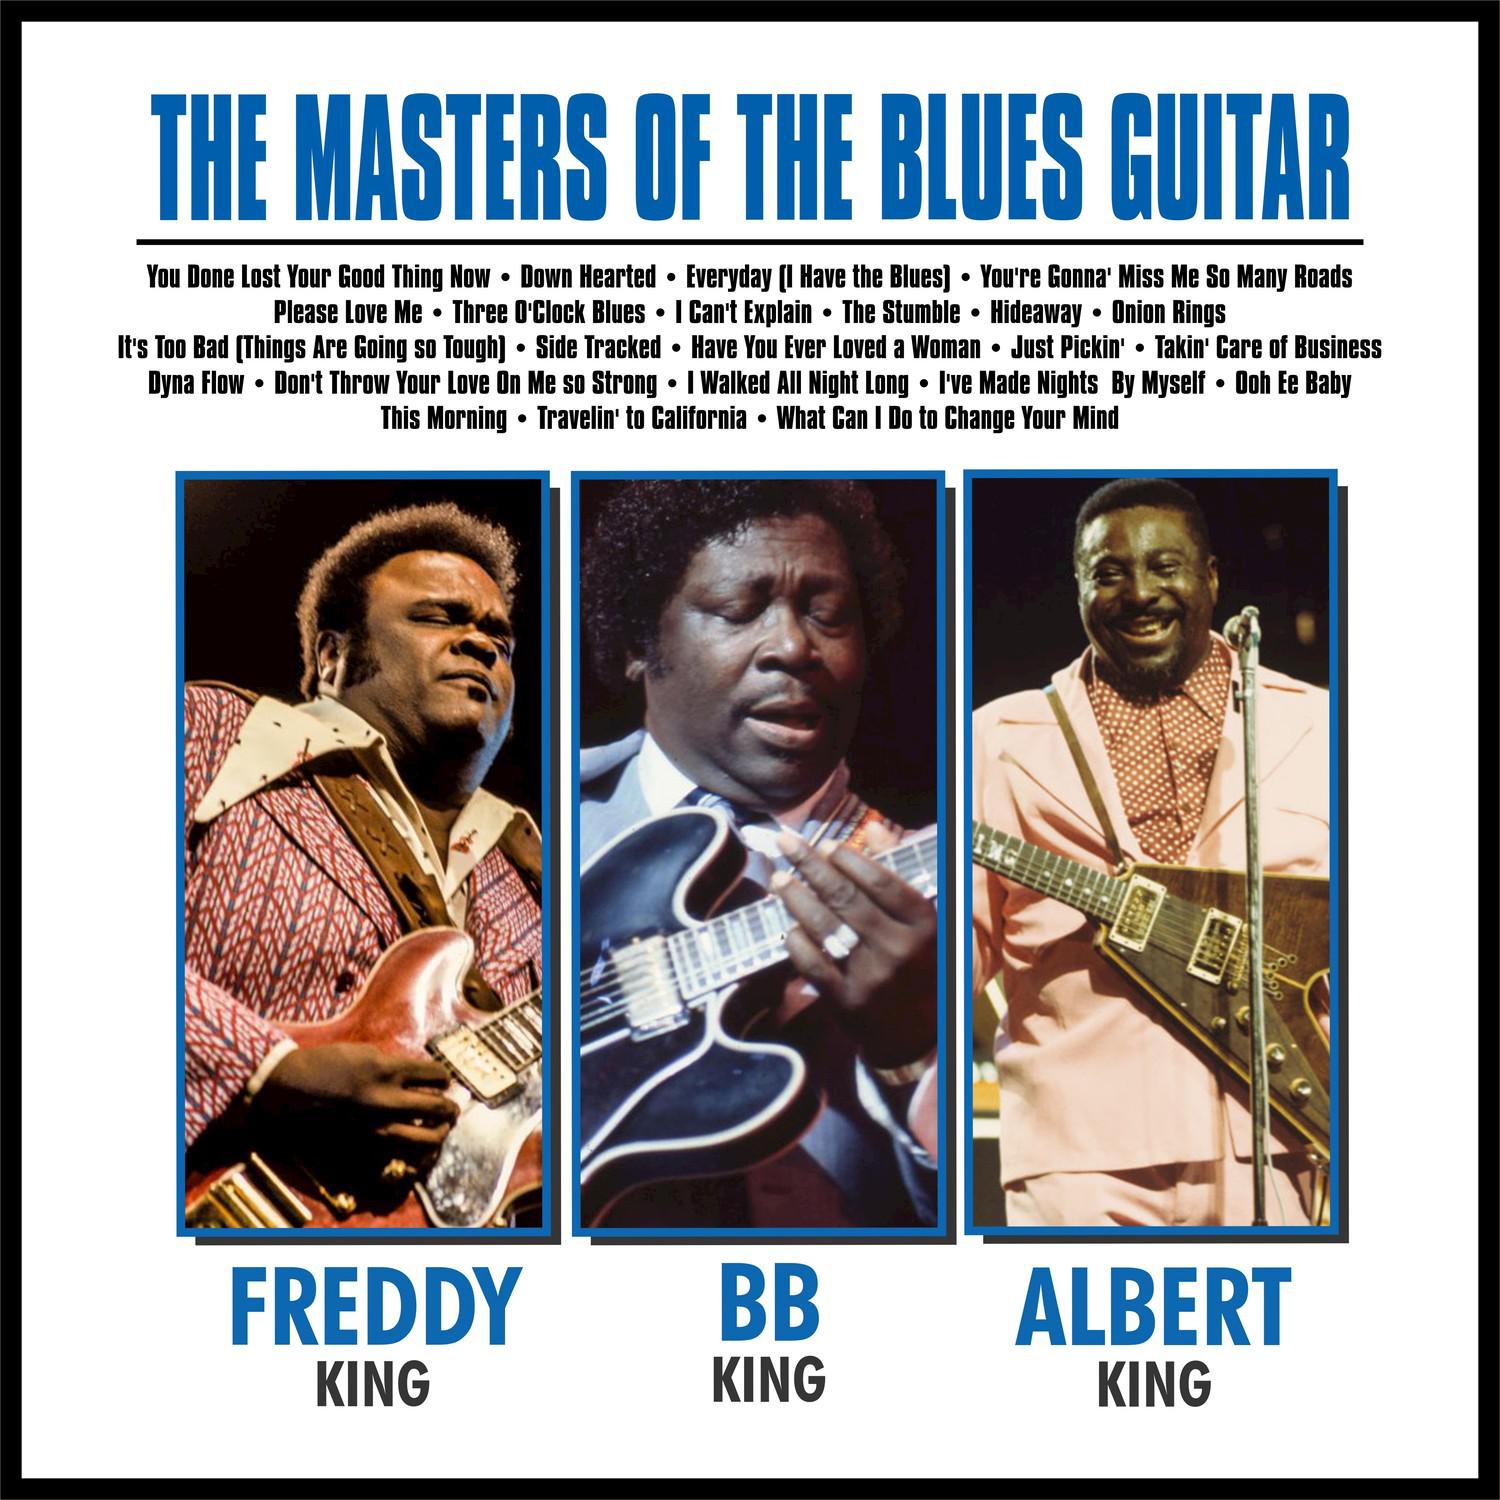 The Masters of the Blues Guitar BB, Albert and Freddy